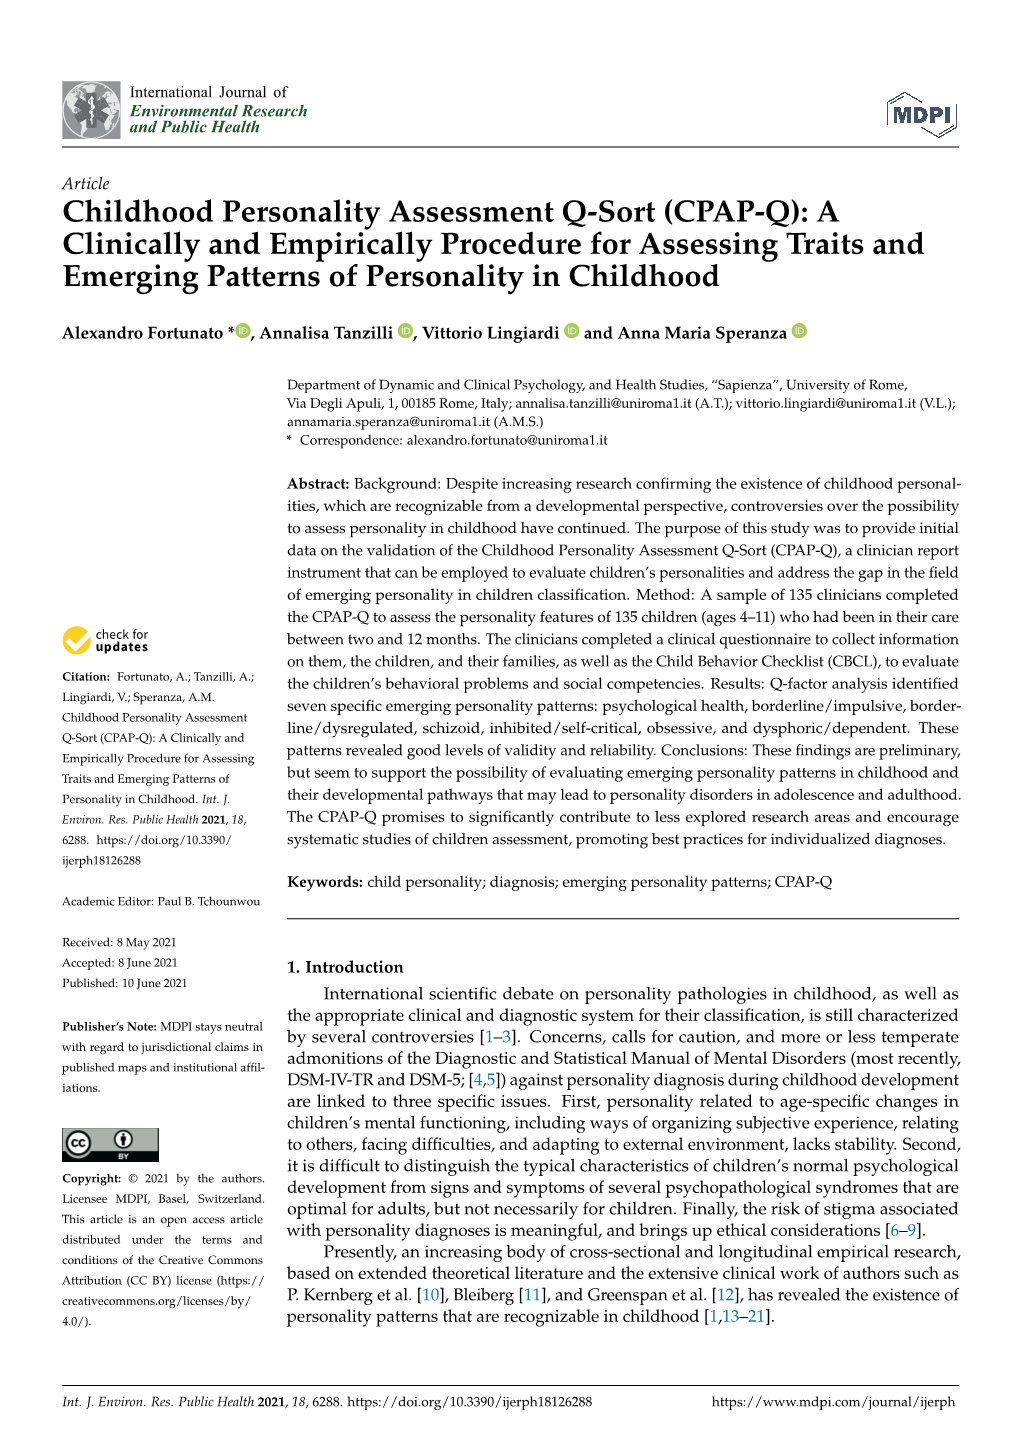 Childhood Personality Assessment Q-Sort (CPAP-Q): a Clinically and Empirically Procedure for Assessing Traits and Emerging Patterns of Personality in Childhood